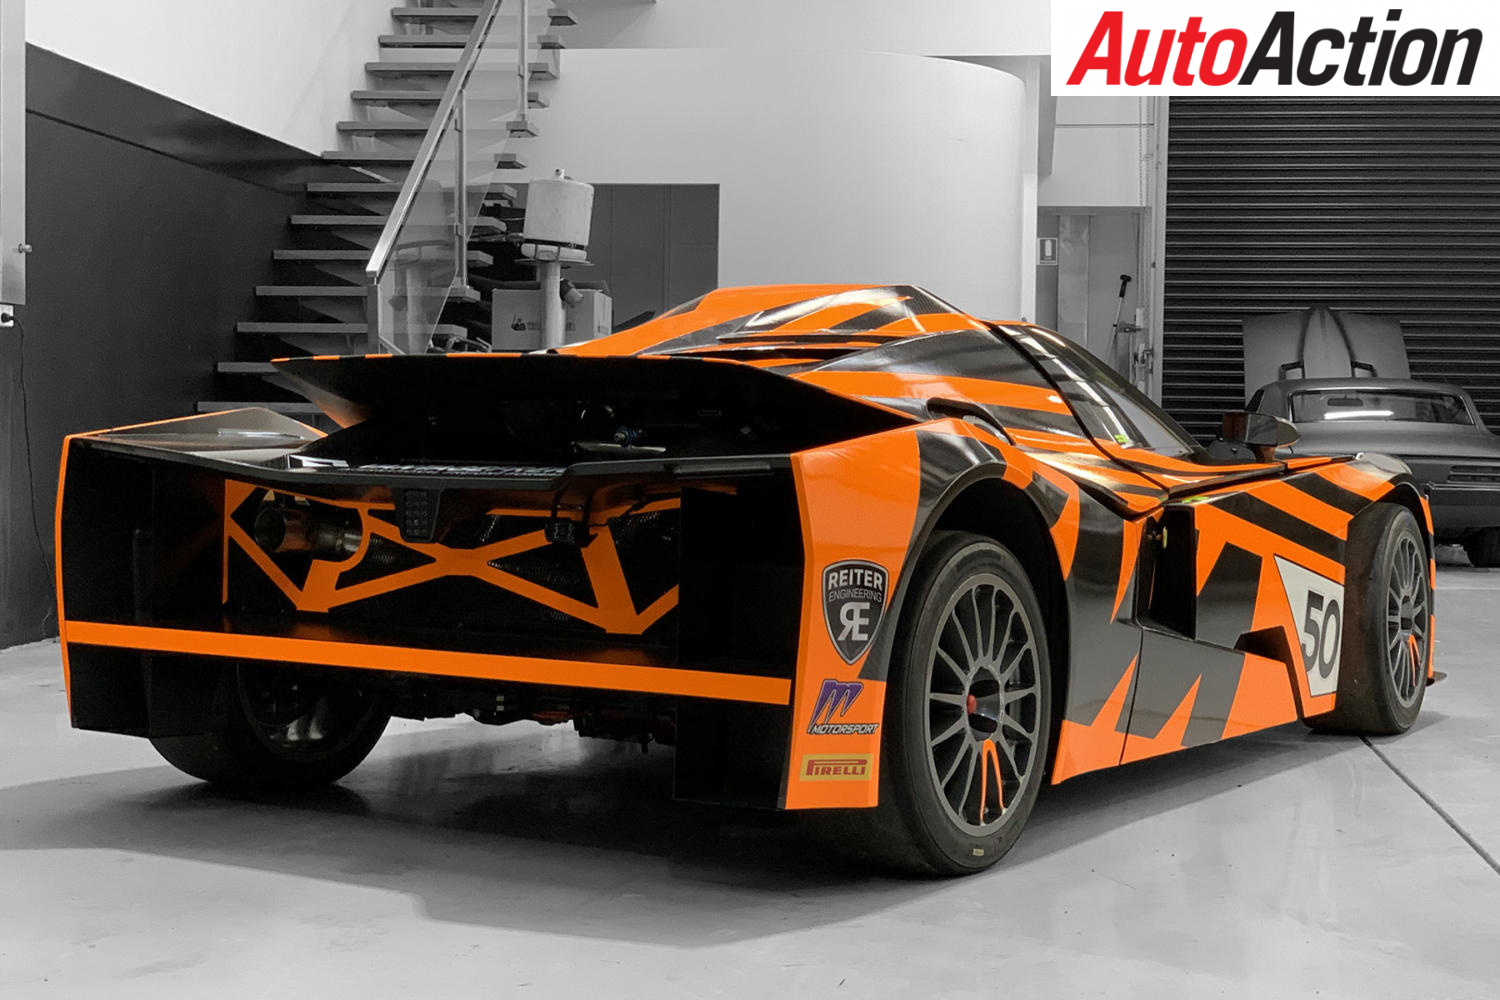 The KTM X-Bow GTX Is A Fresh Out Of The Box Racecar With 530 HP - IMBOLDN